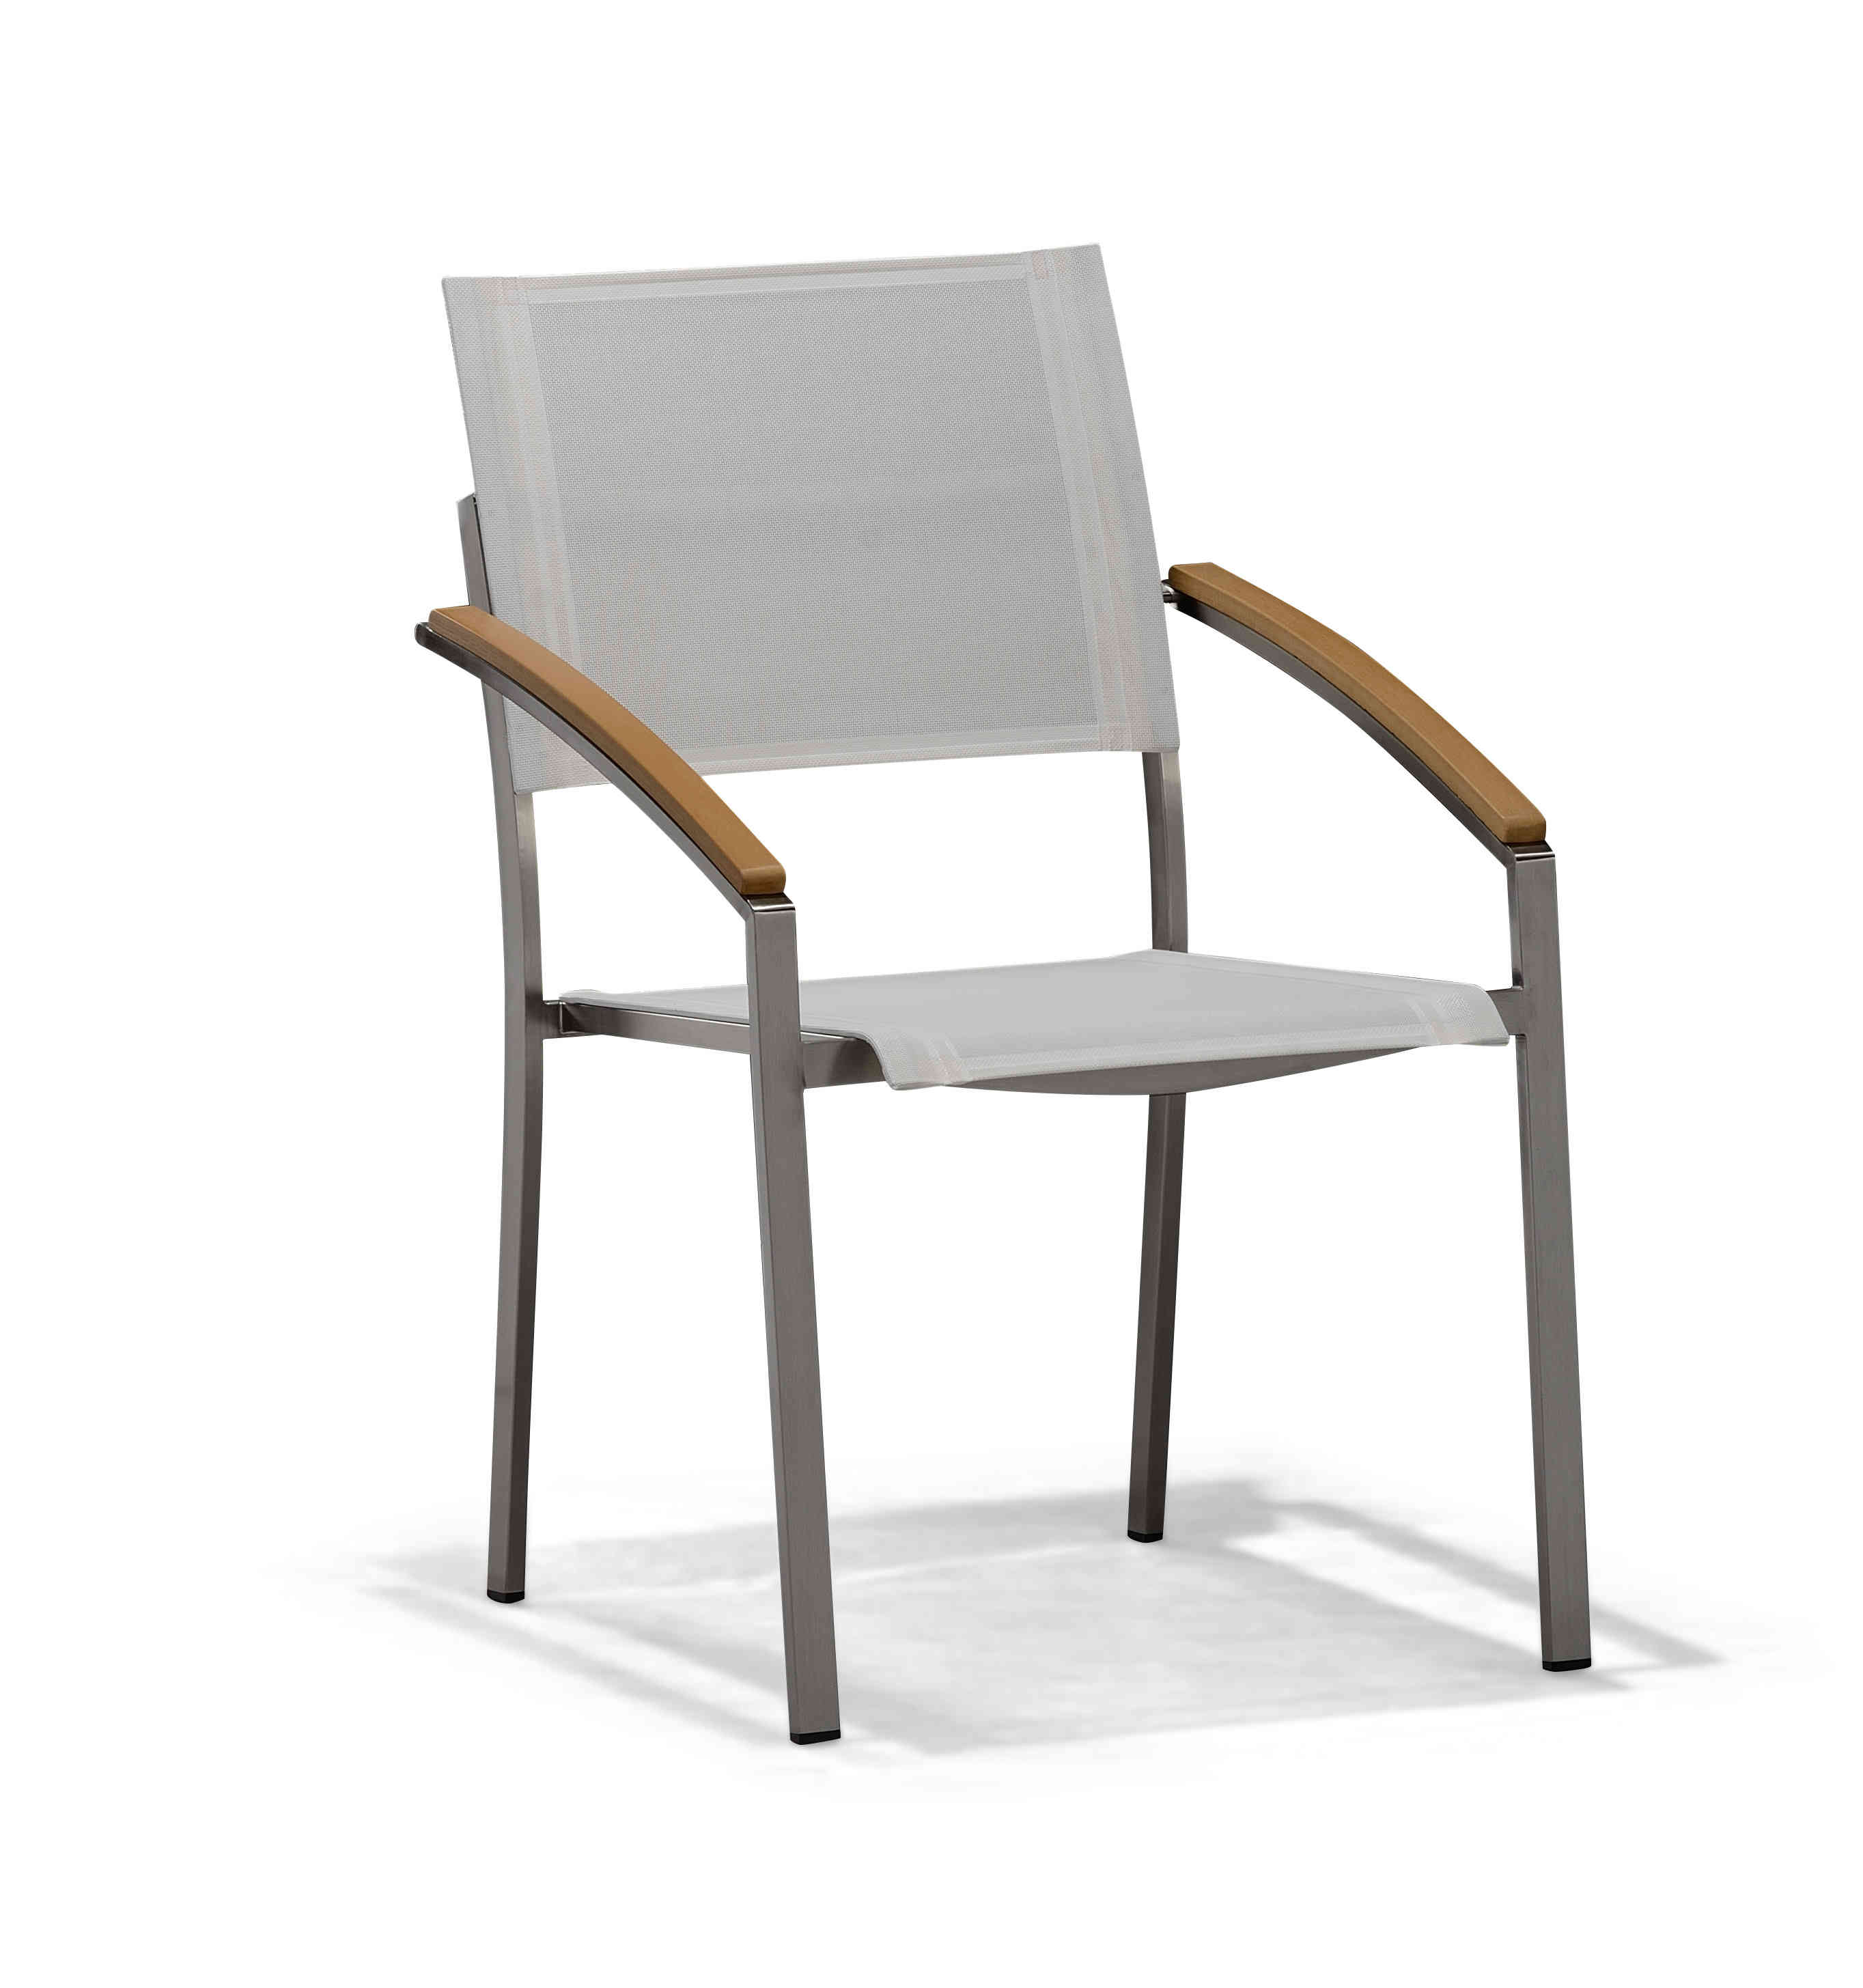 Metal garden dining furniture dining chair (Y112BF)